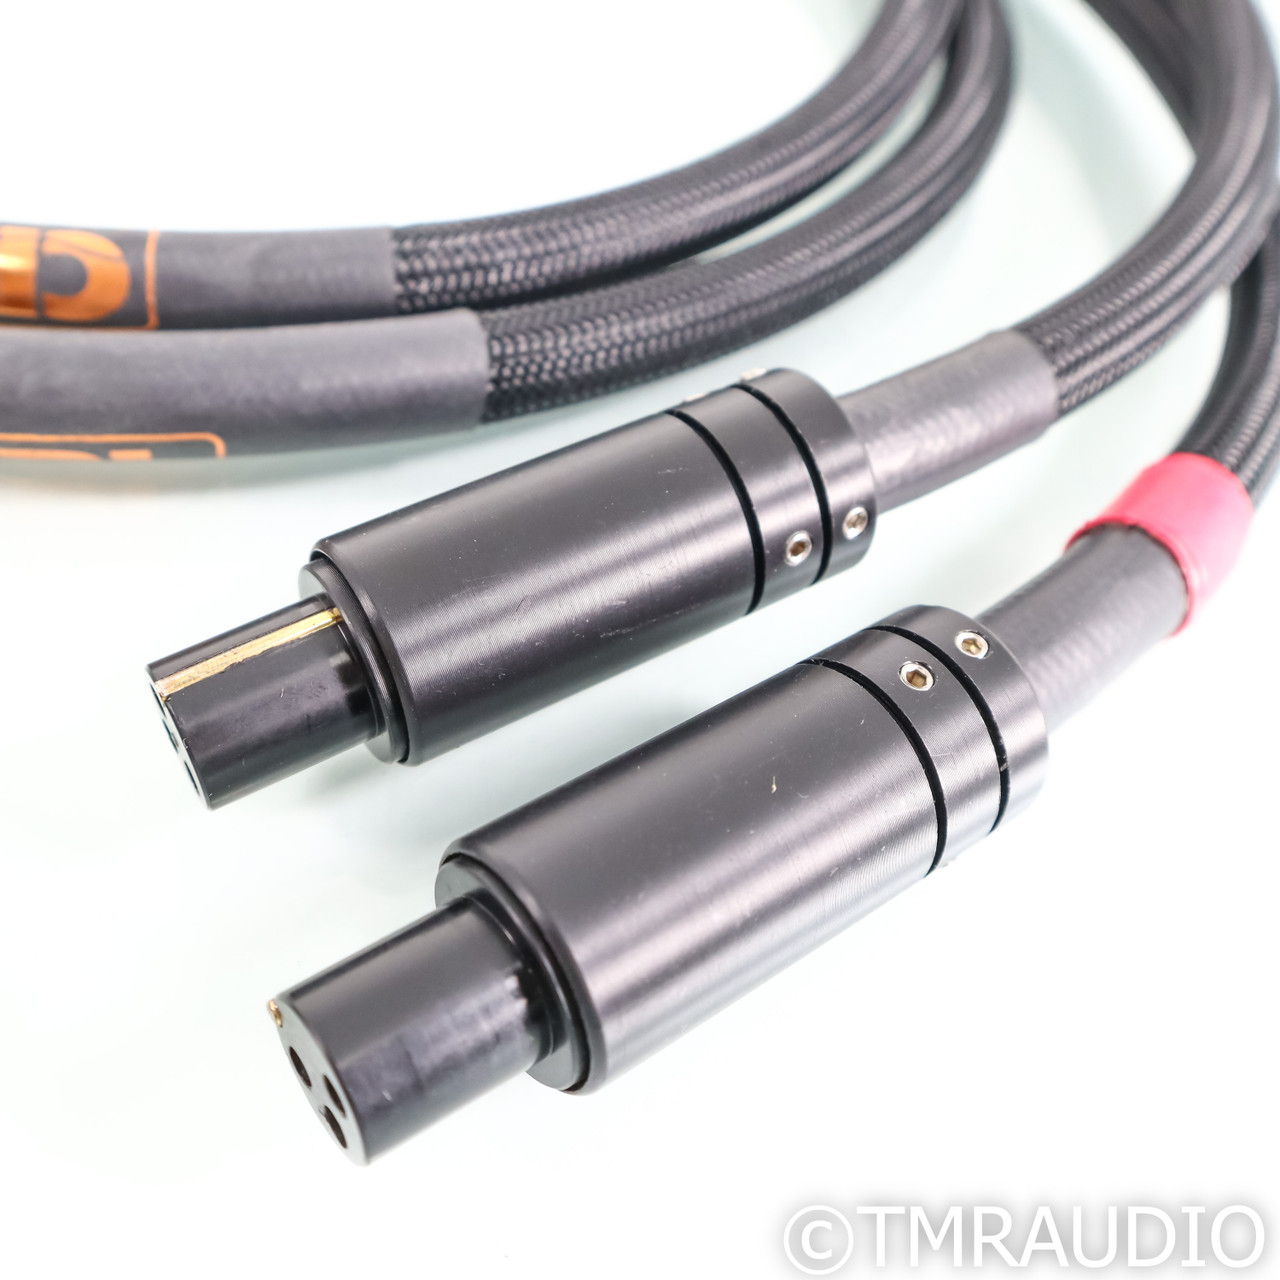 Cable Research Lab Bronze XLR Cables; 2m Pair Balanced ... 5